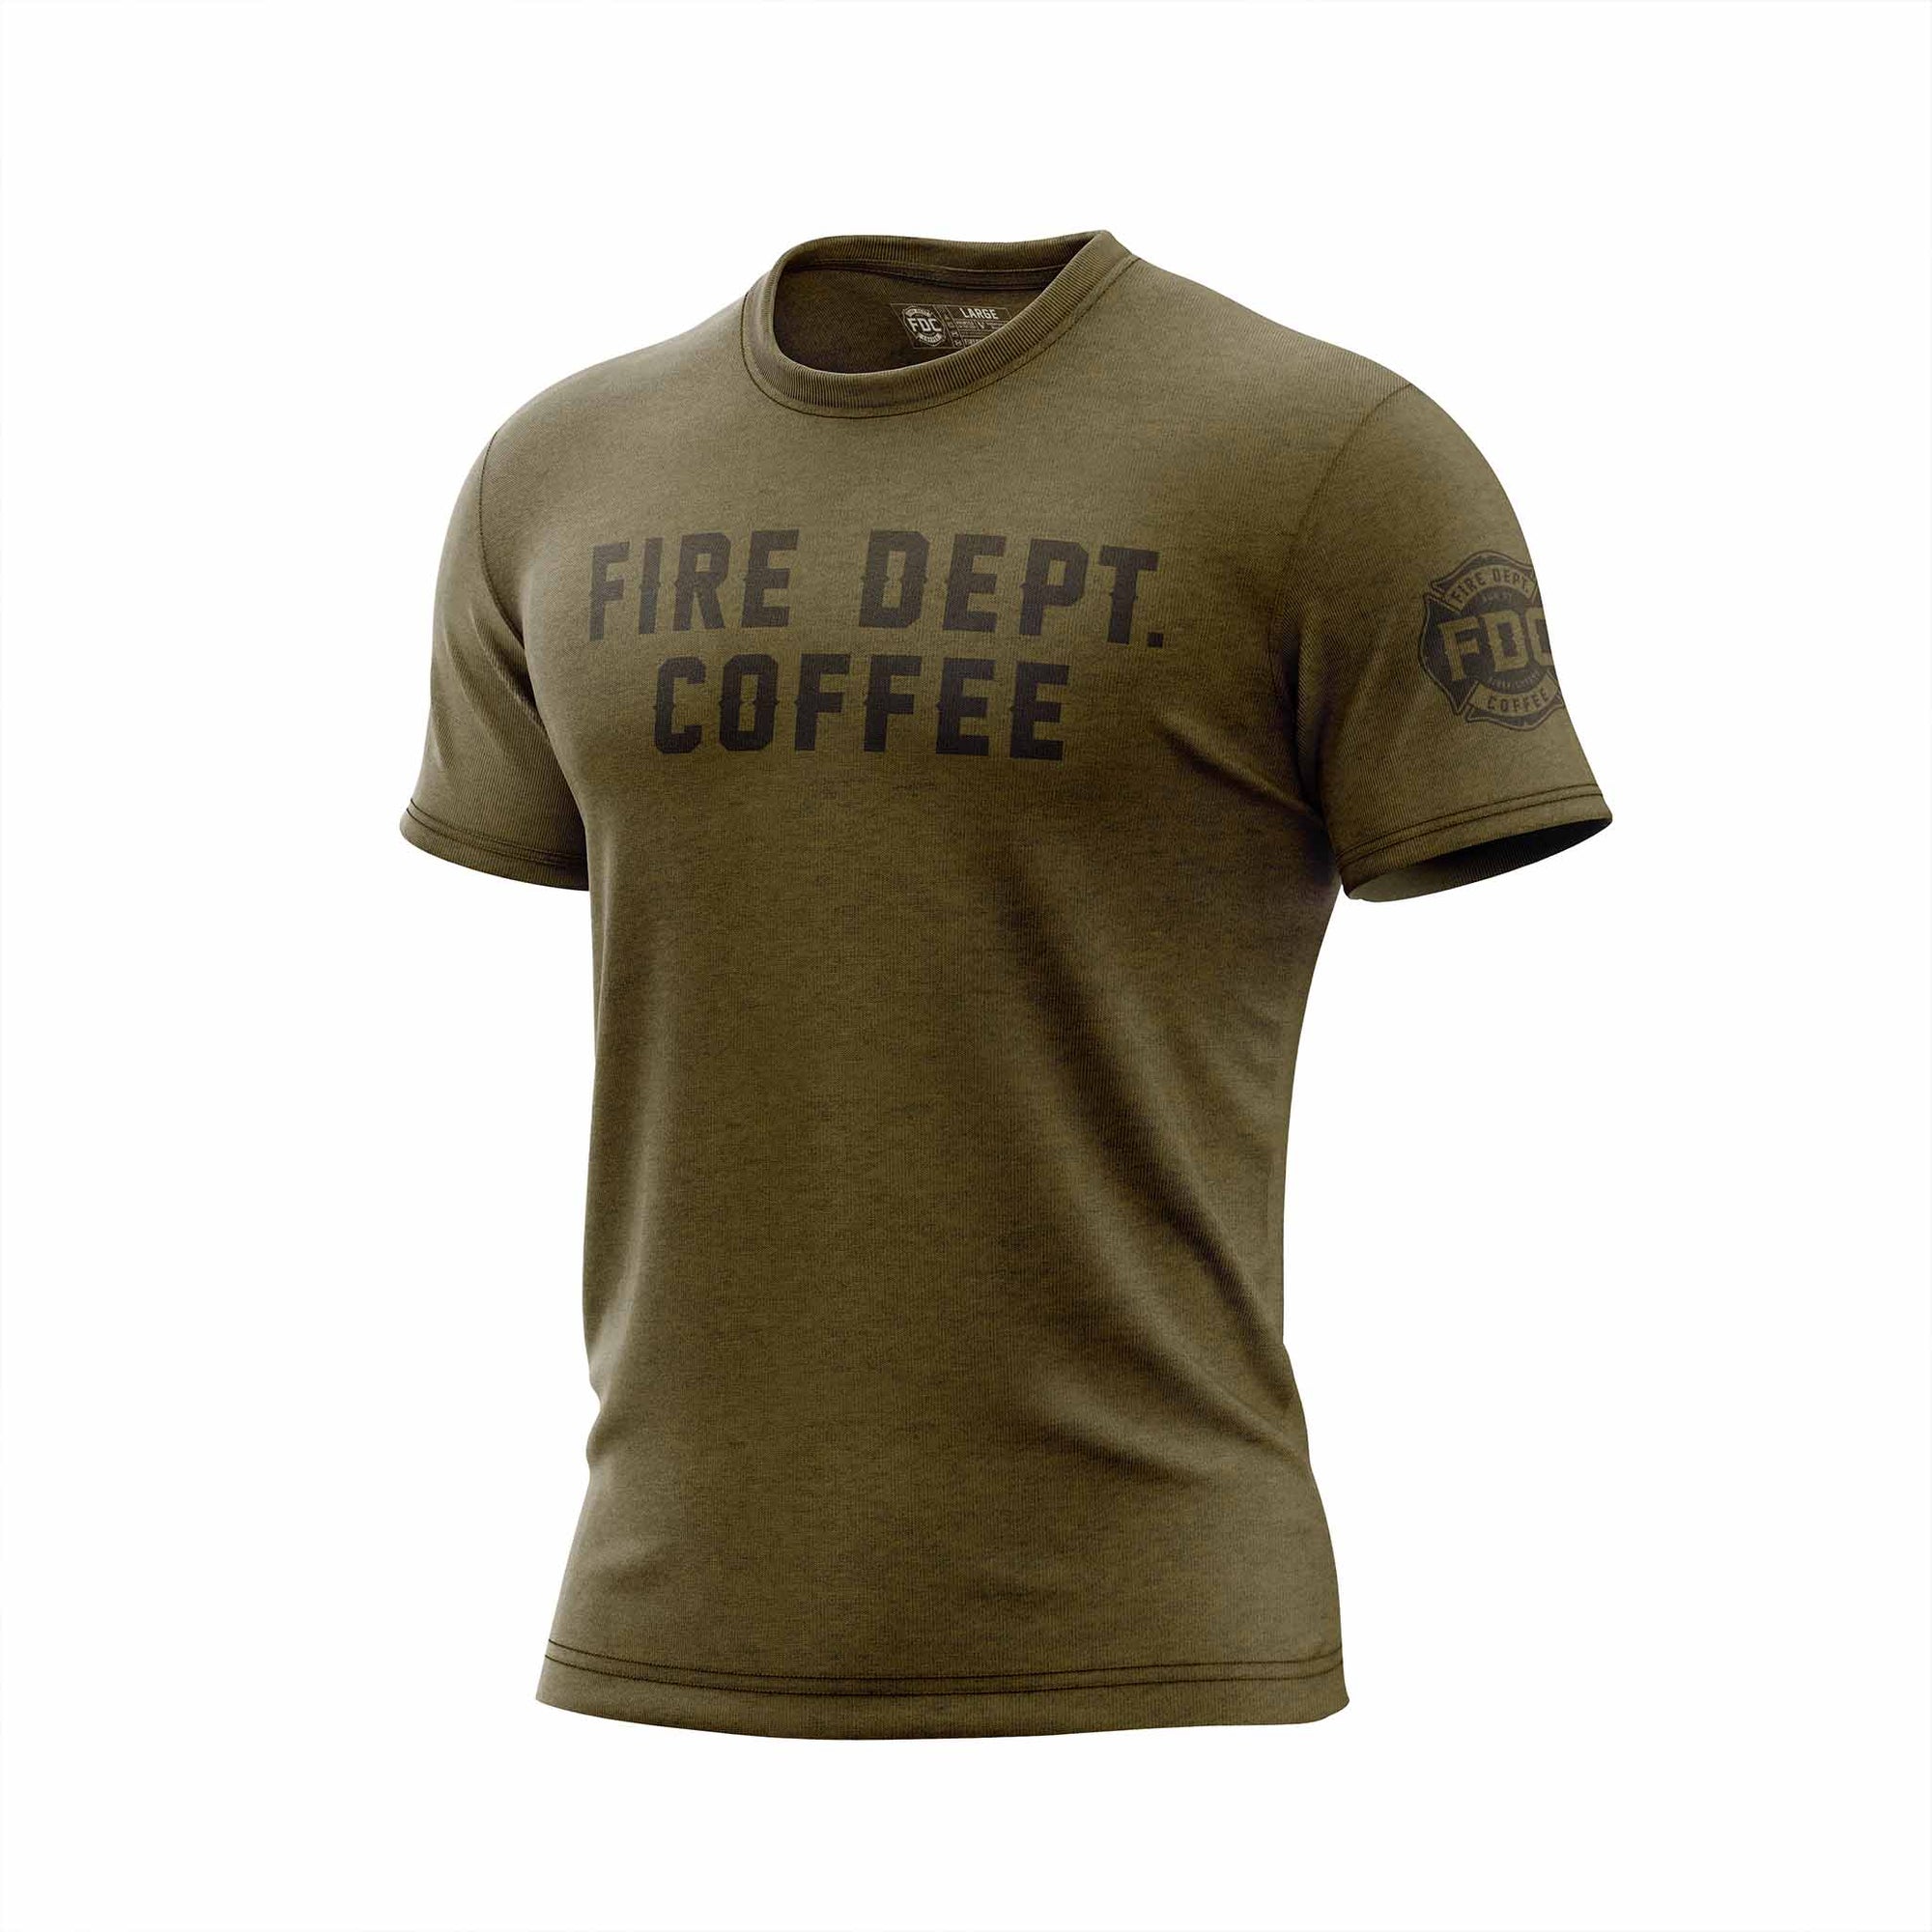 Military green short sleeve t shirt with "Fire Dept. Coffee" in large letters across the chest and the FDC maltese cross logo on the sleeve